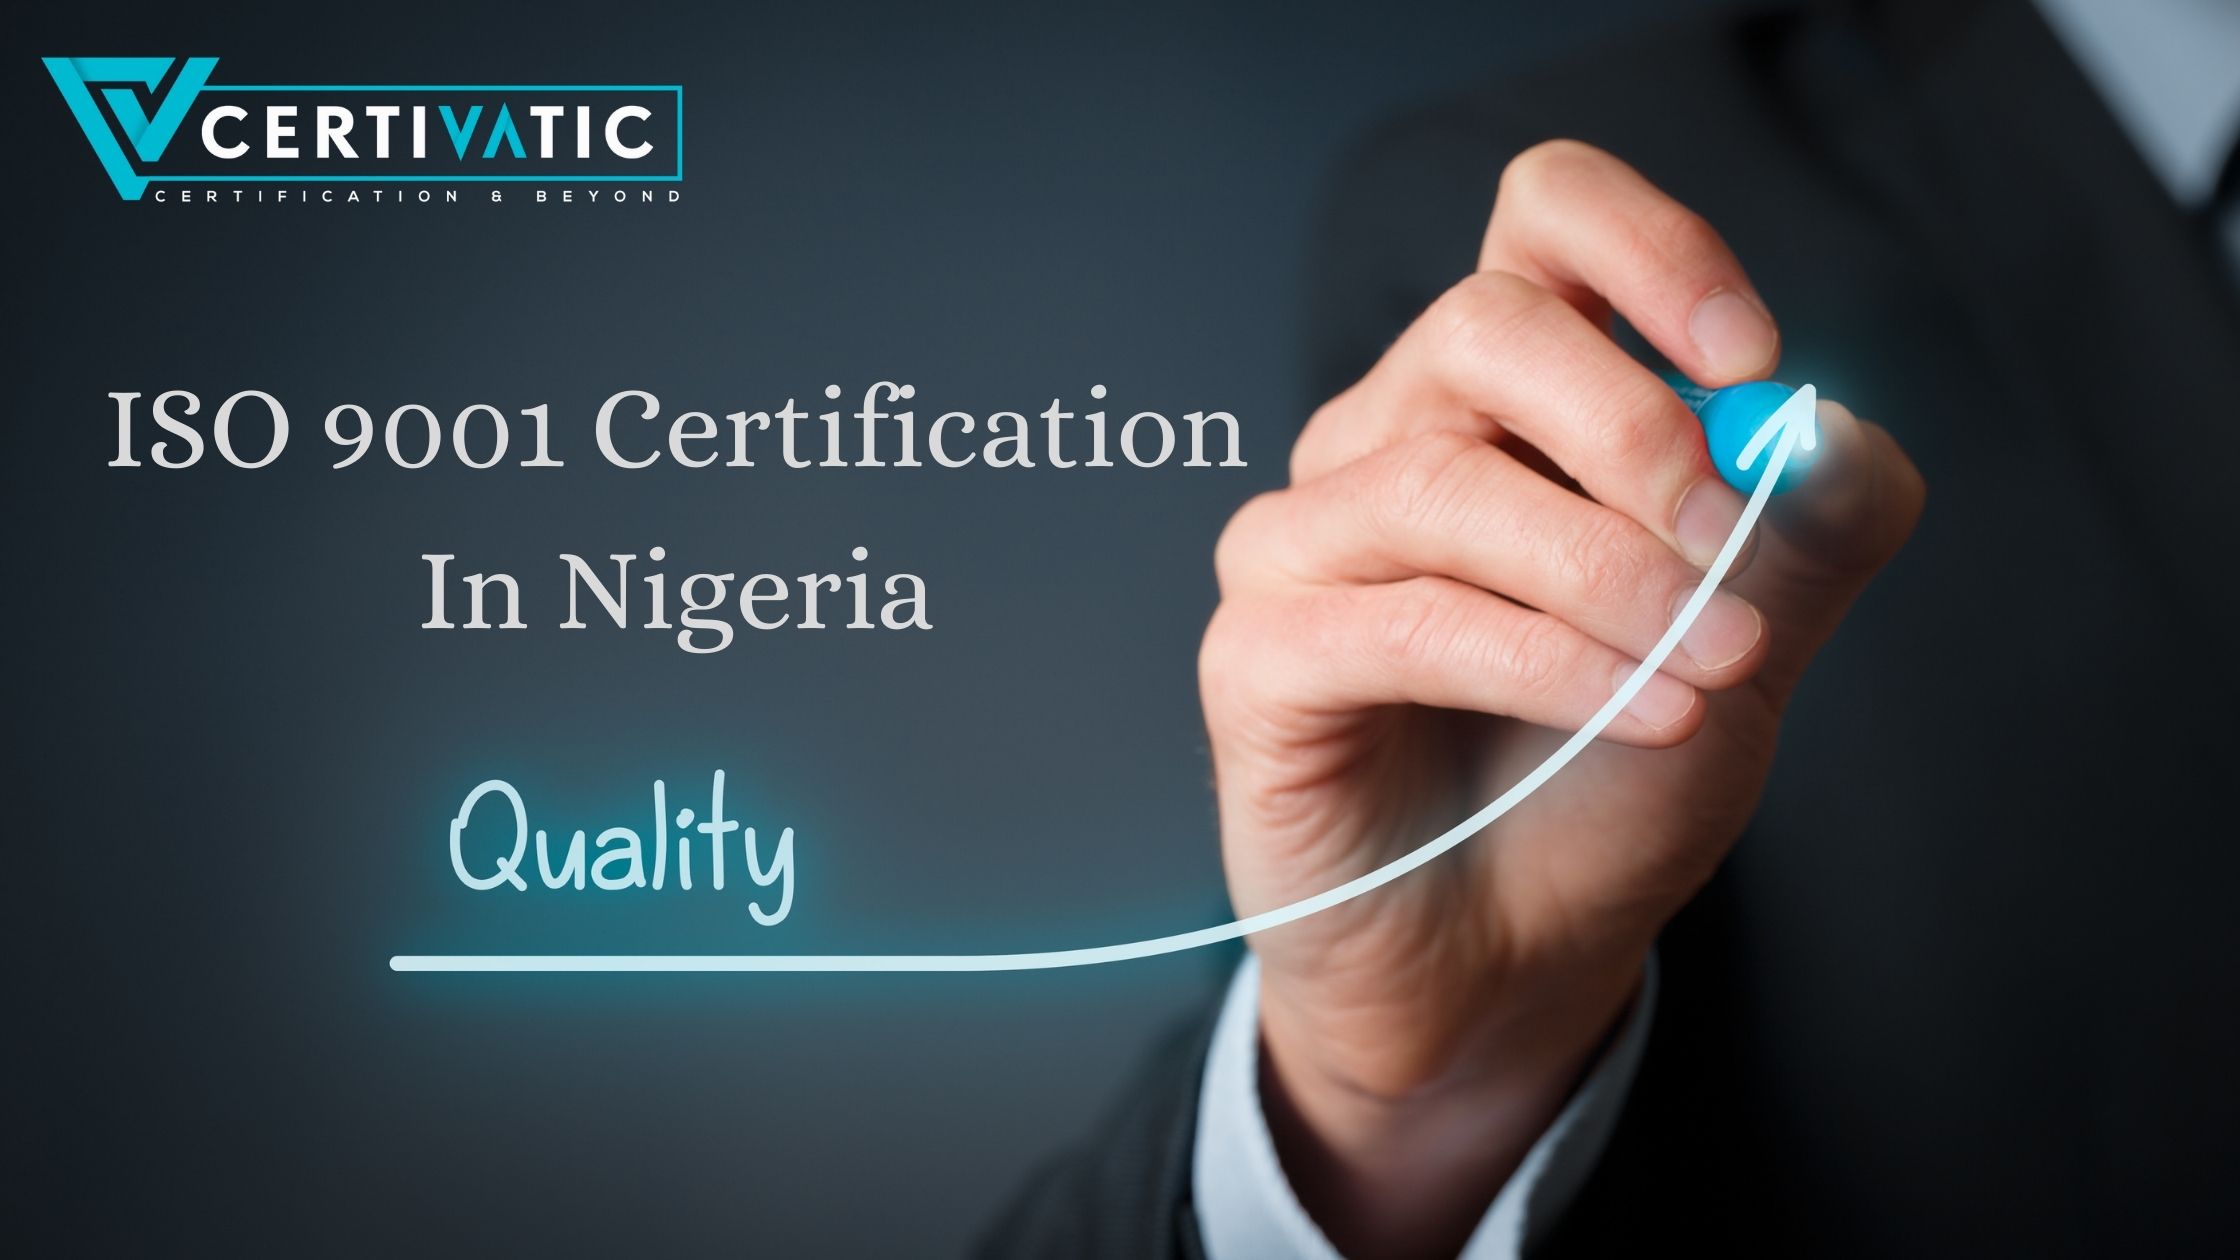 ISO 9001 Certification In Nigeria